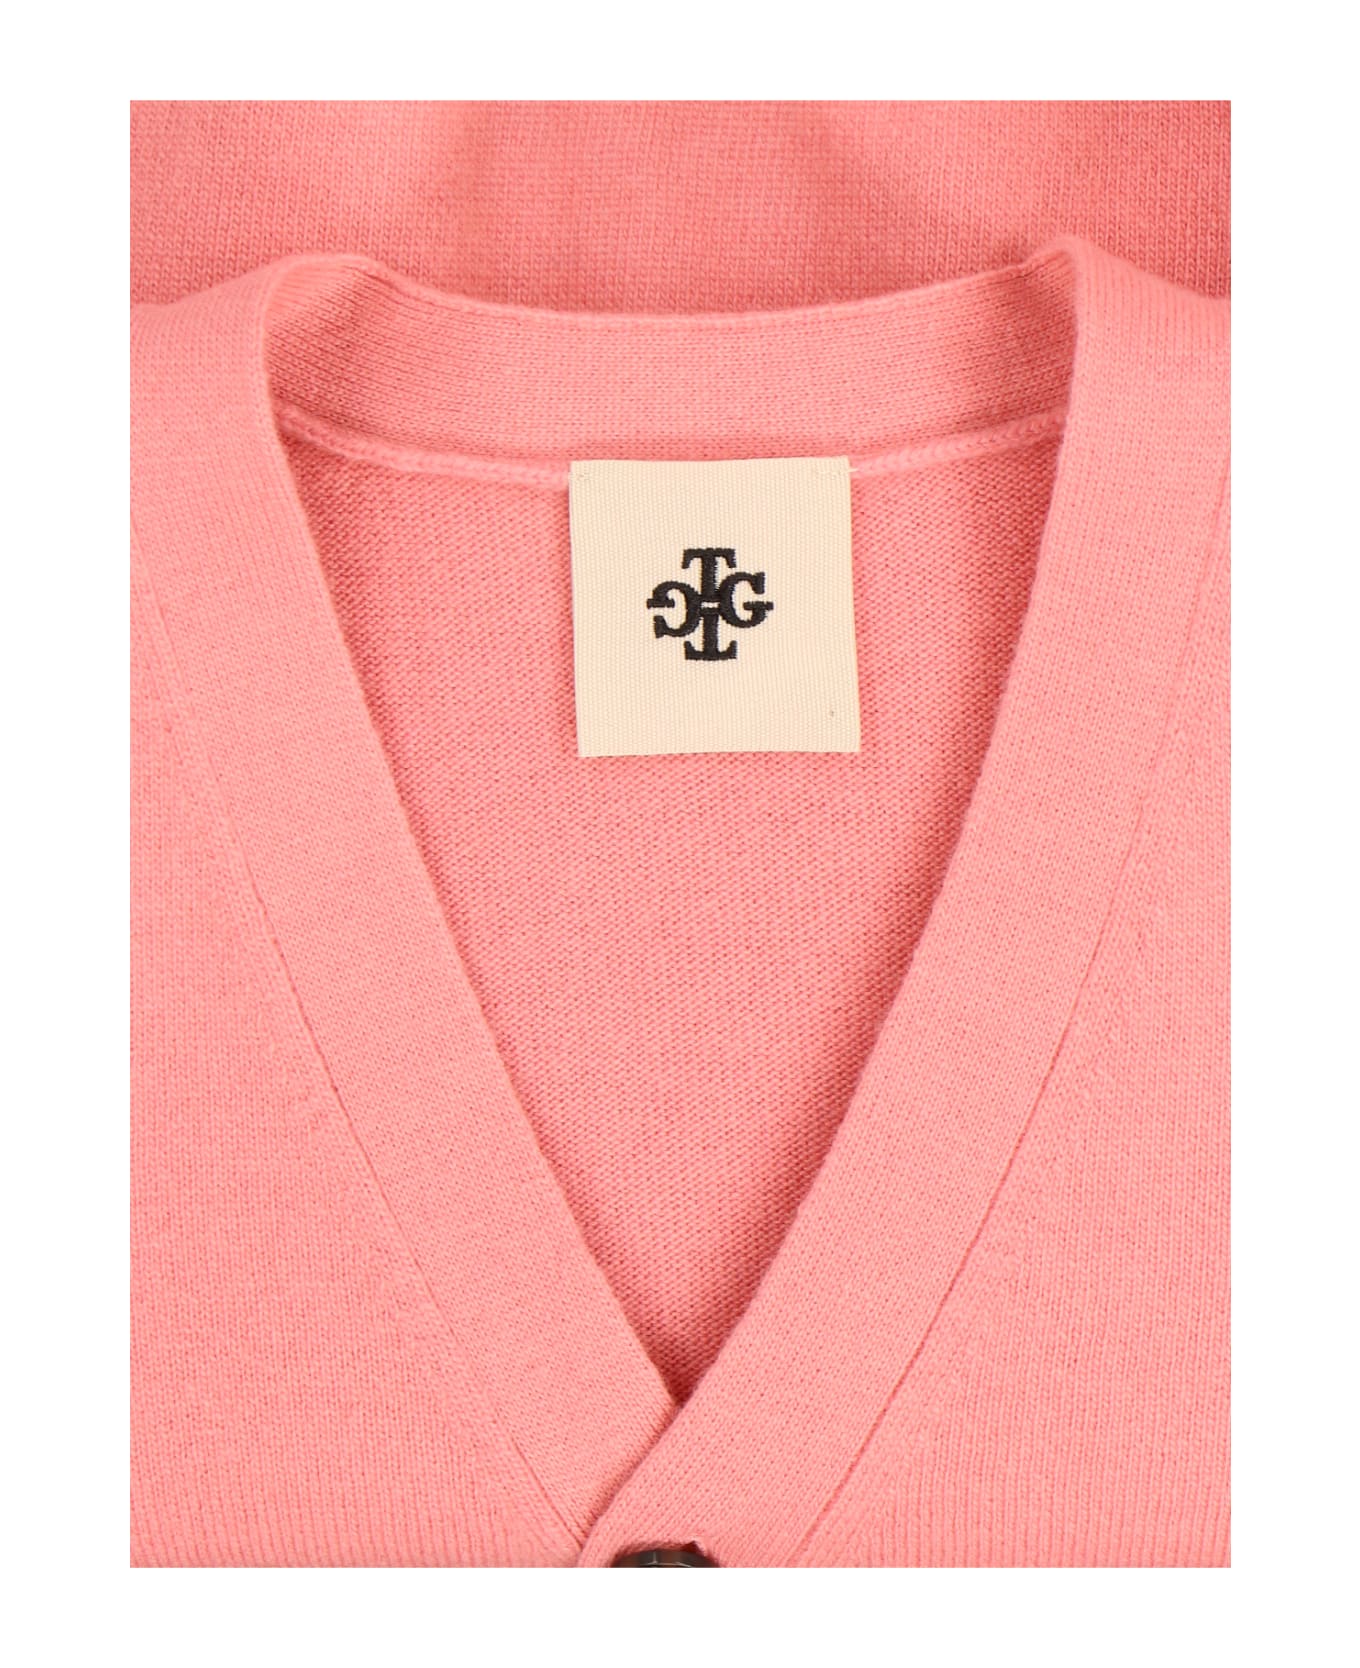 The Garment Sweater - Pink